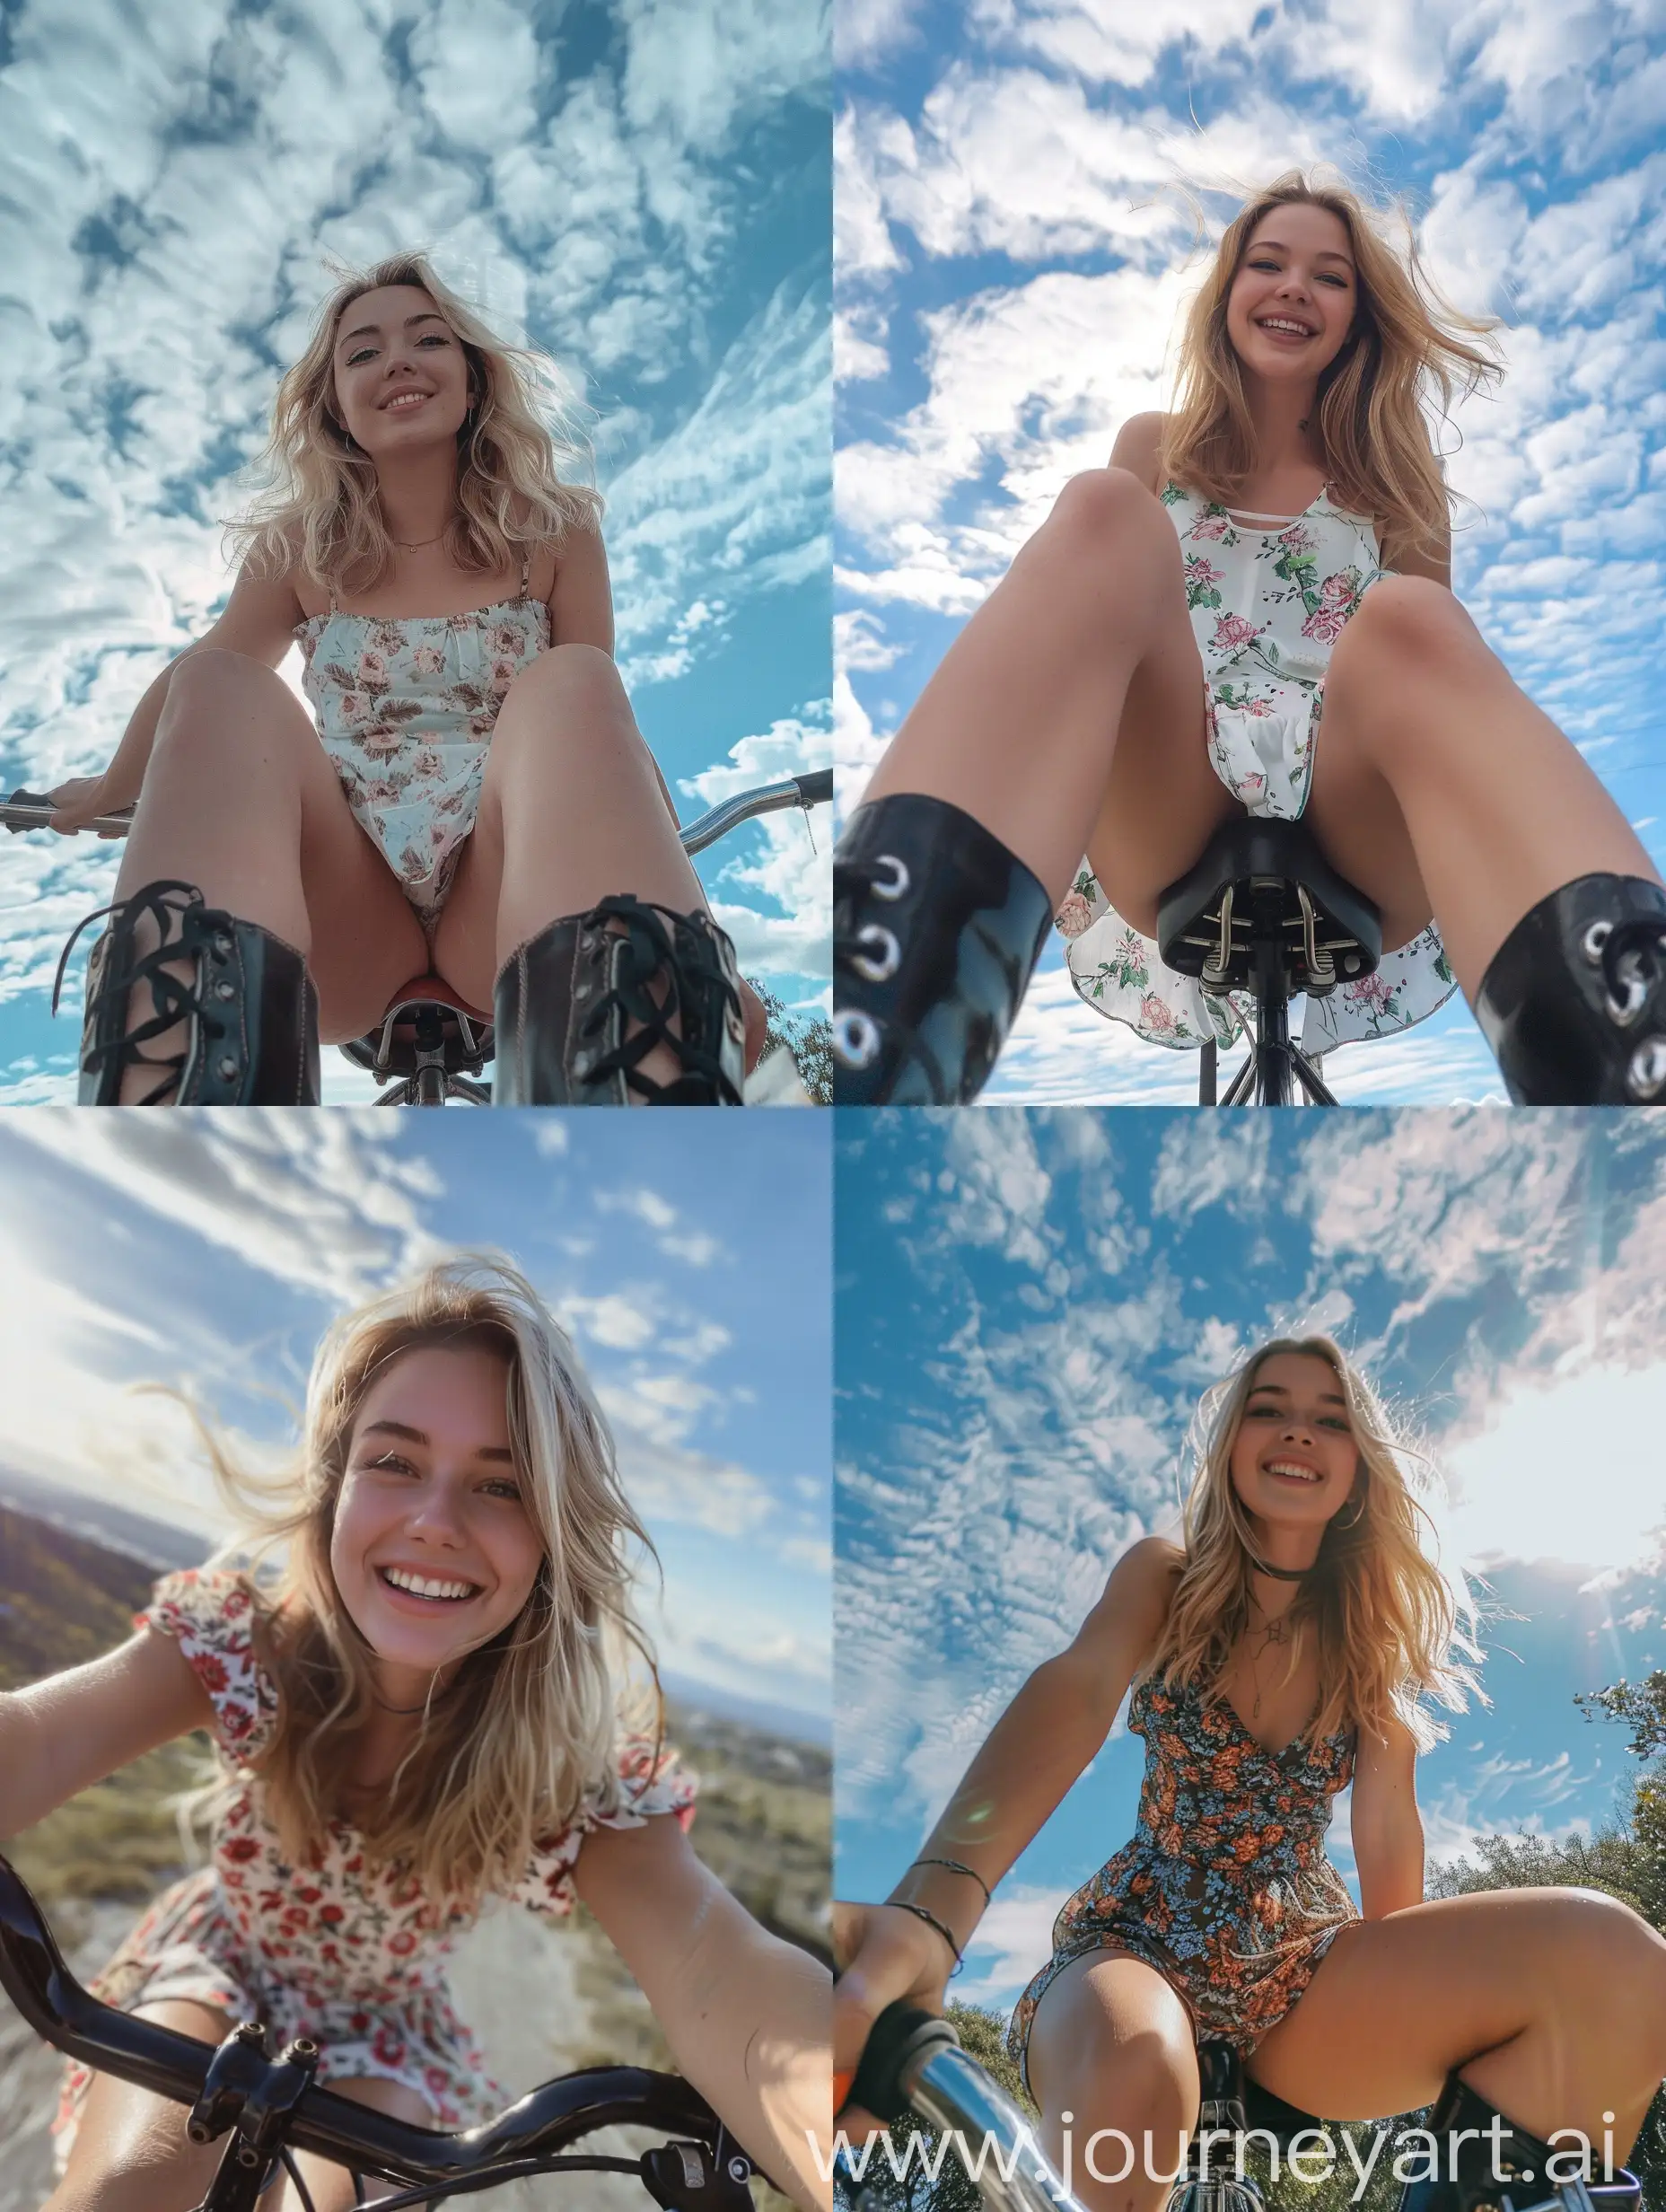 a girl, 22 years old, blonde hair, party's dress, black boots, smiling, ,fat legs,  sitting on a bicycle, no effects, selfie , iphone selfie, no filters, natural , iphone photo natural, camera down angle, sky view, down view